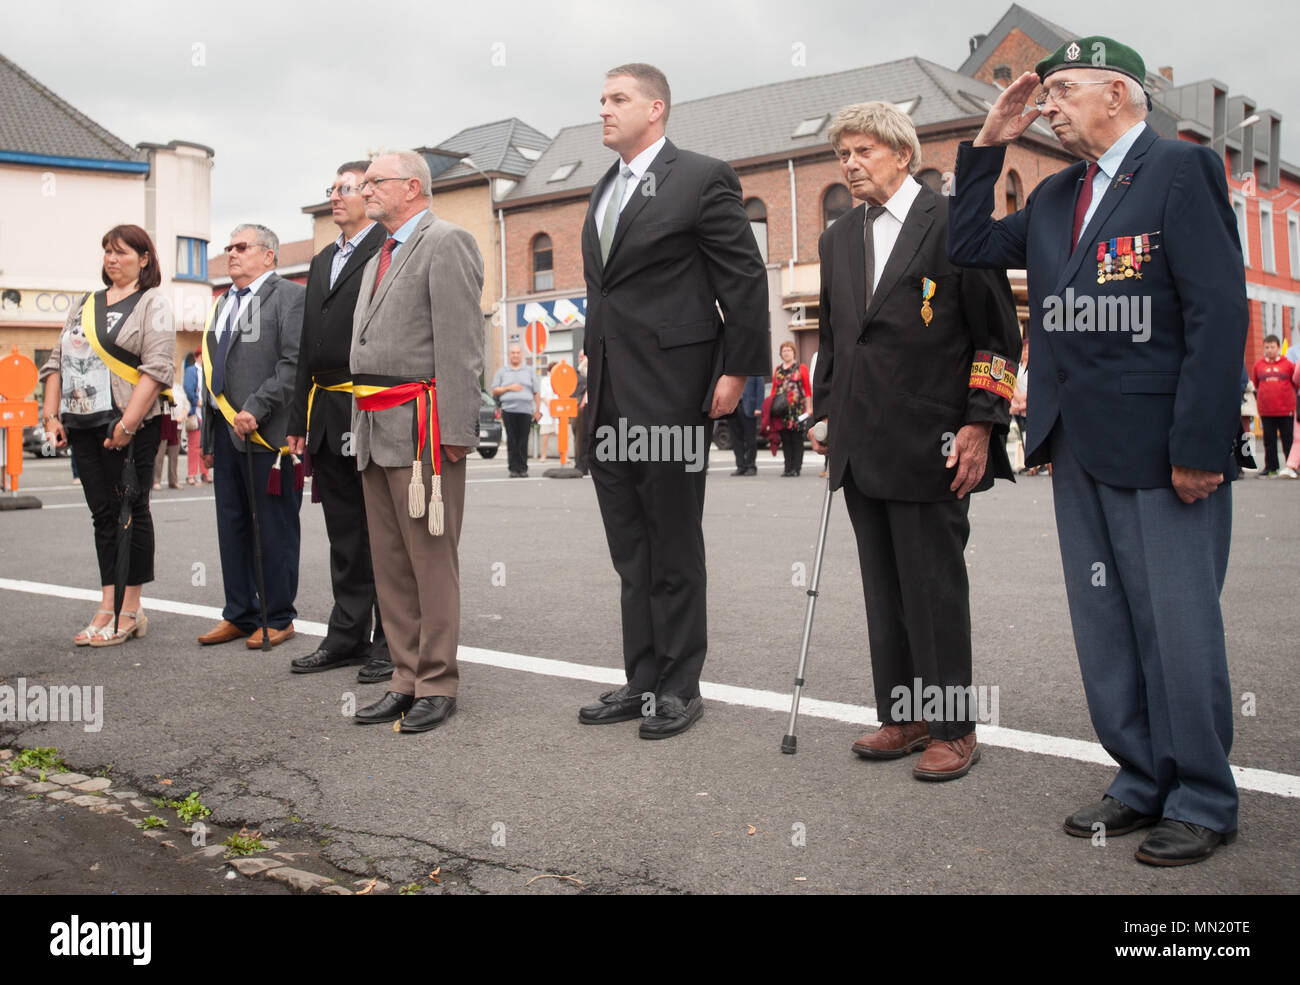 André Desmarlières, Mayor of Brugelette, Belgium, LTC Bill Lovell, Command Chaplain for USAG Benelux, and other participants show honors during the Belgian national anthem at a monument during the memorial ceremony for Belgian Lt. Col. Joseph Daumerie, Aug. 15, 2017, Brugelette, Belgium. The memorial commemorates the 75th anniversary of Daumerie's death. Daumerie is a war hero and fighter pilot who was executed in 1942 during World War II. The event offered a unique opportunity for the U.S. service members to honor a fallen hero and strengthen their relationship with NATO allies during the U.S Stock Photo